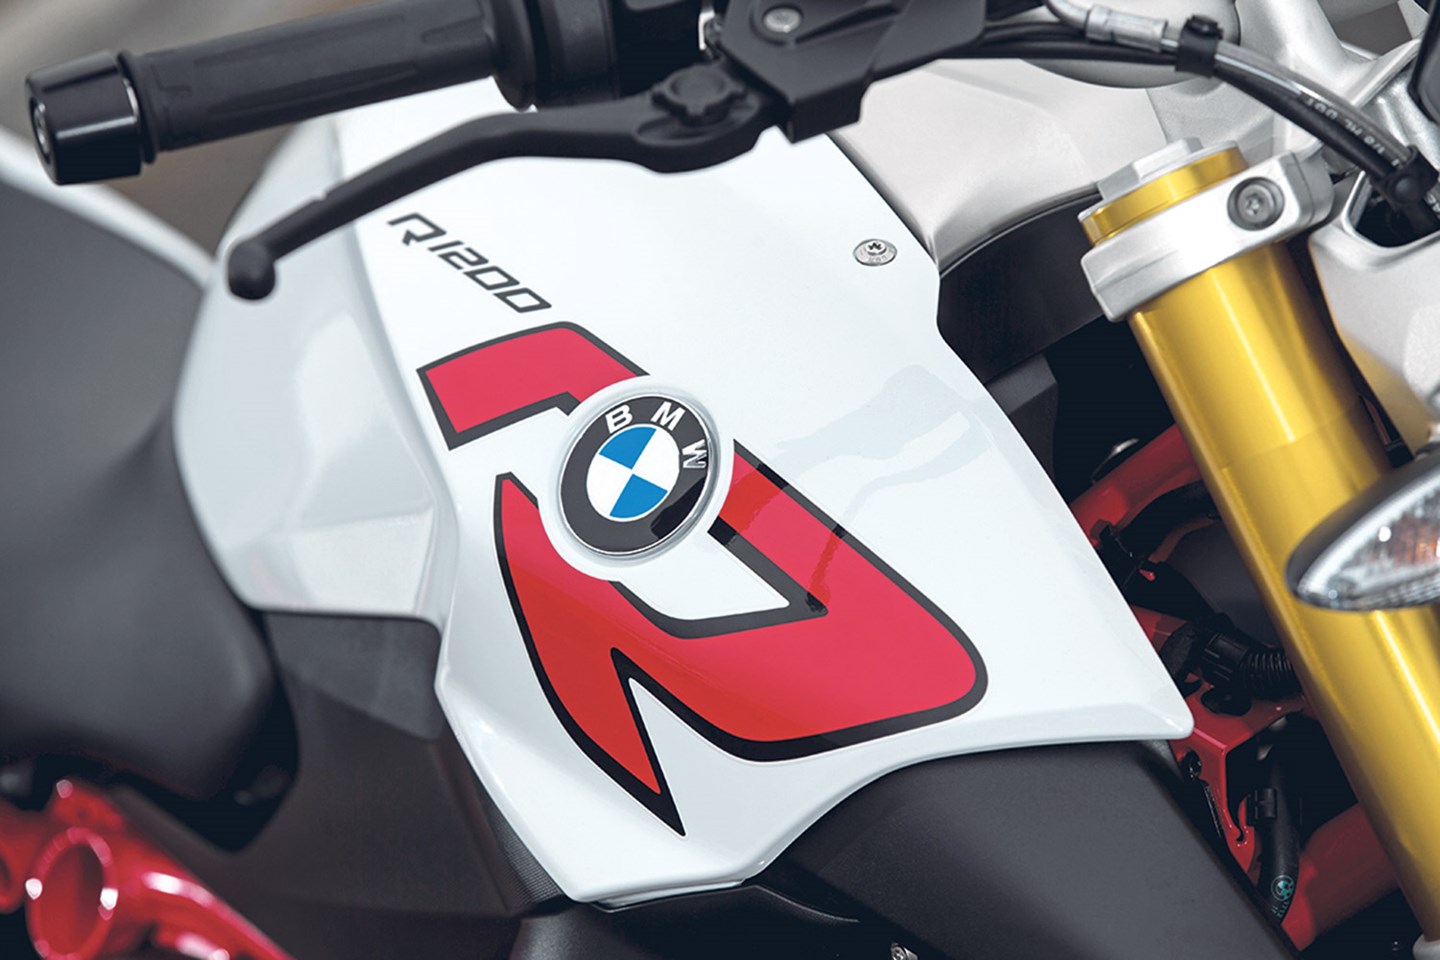 BMW R1200R (2015-2018) Review